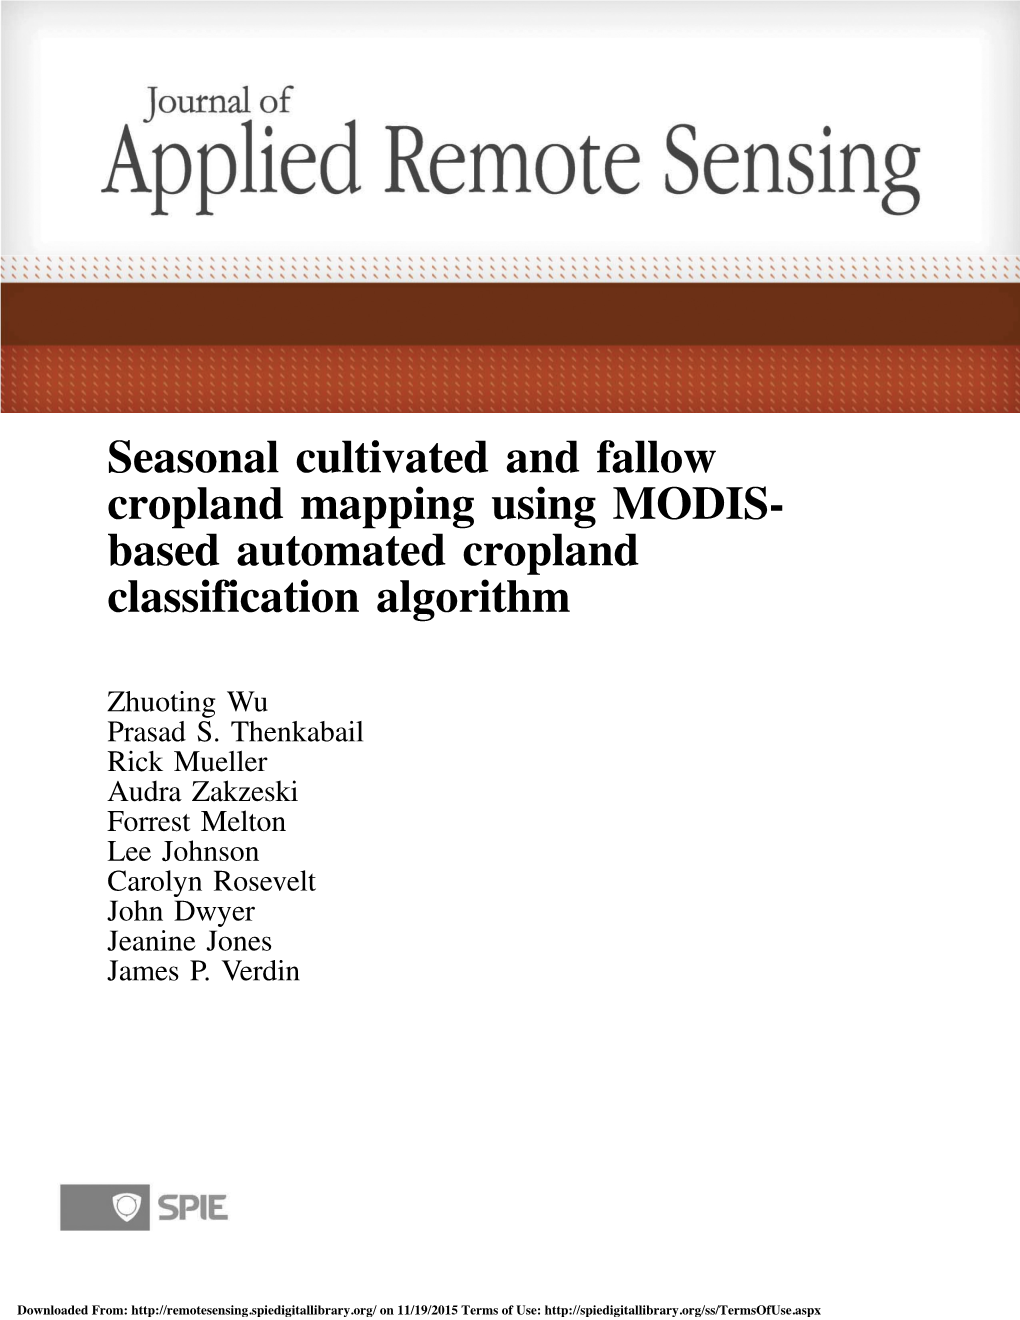 Seasonal Cultivated and Fallow Cropland Mapping Using MODIS- Based Automated Cropland Classification Algorithm